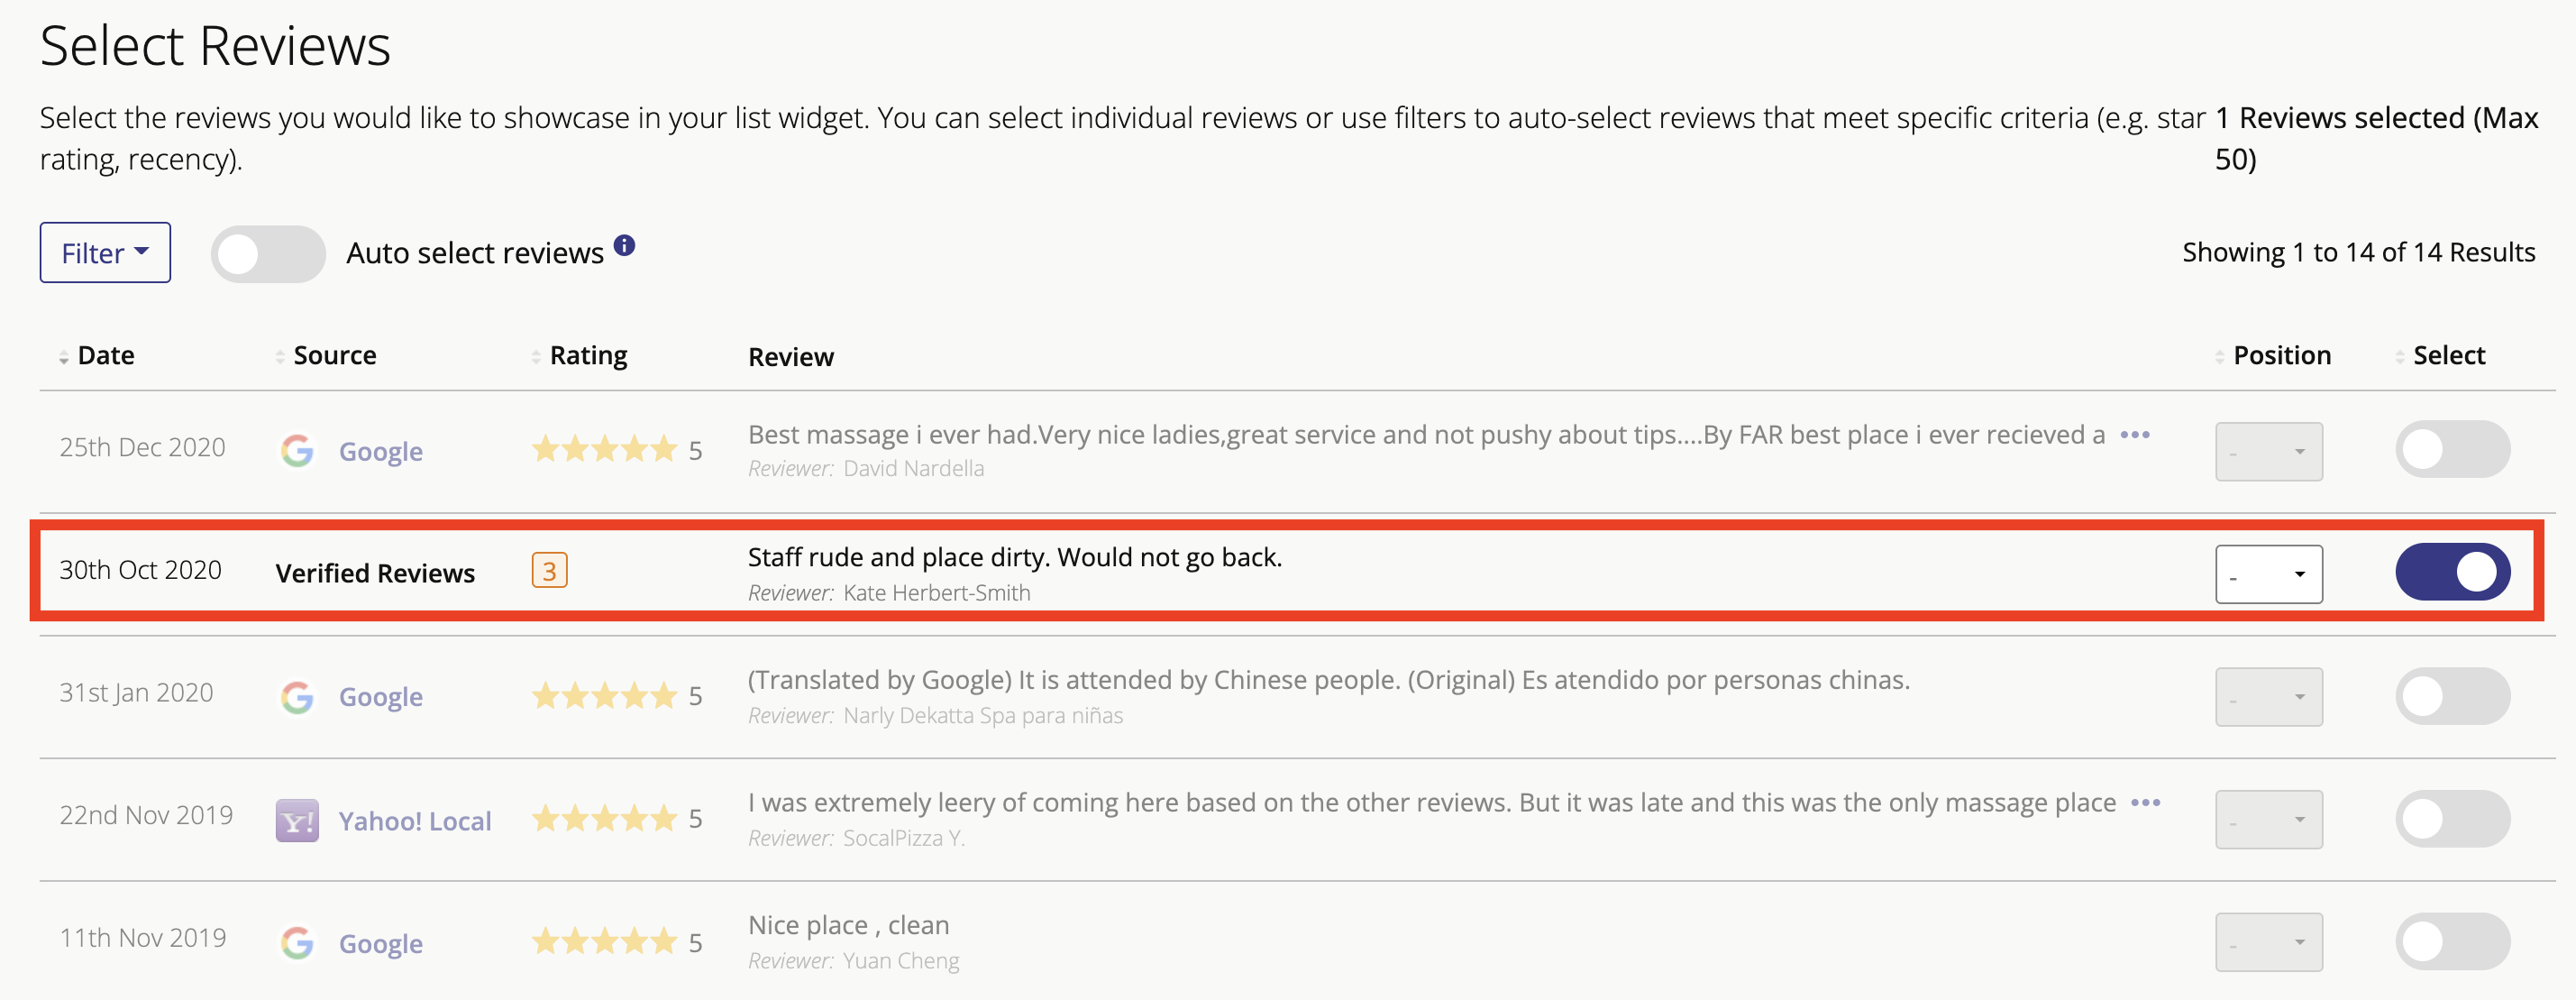 2-Can_I_publish_my_Get_Reviews_feedback_on_a_Showcase_Reviews_widget_.png